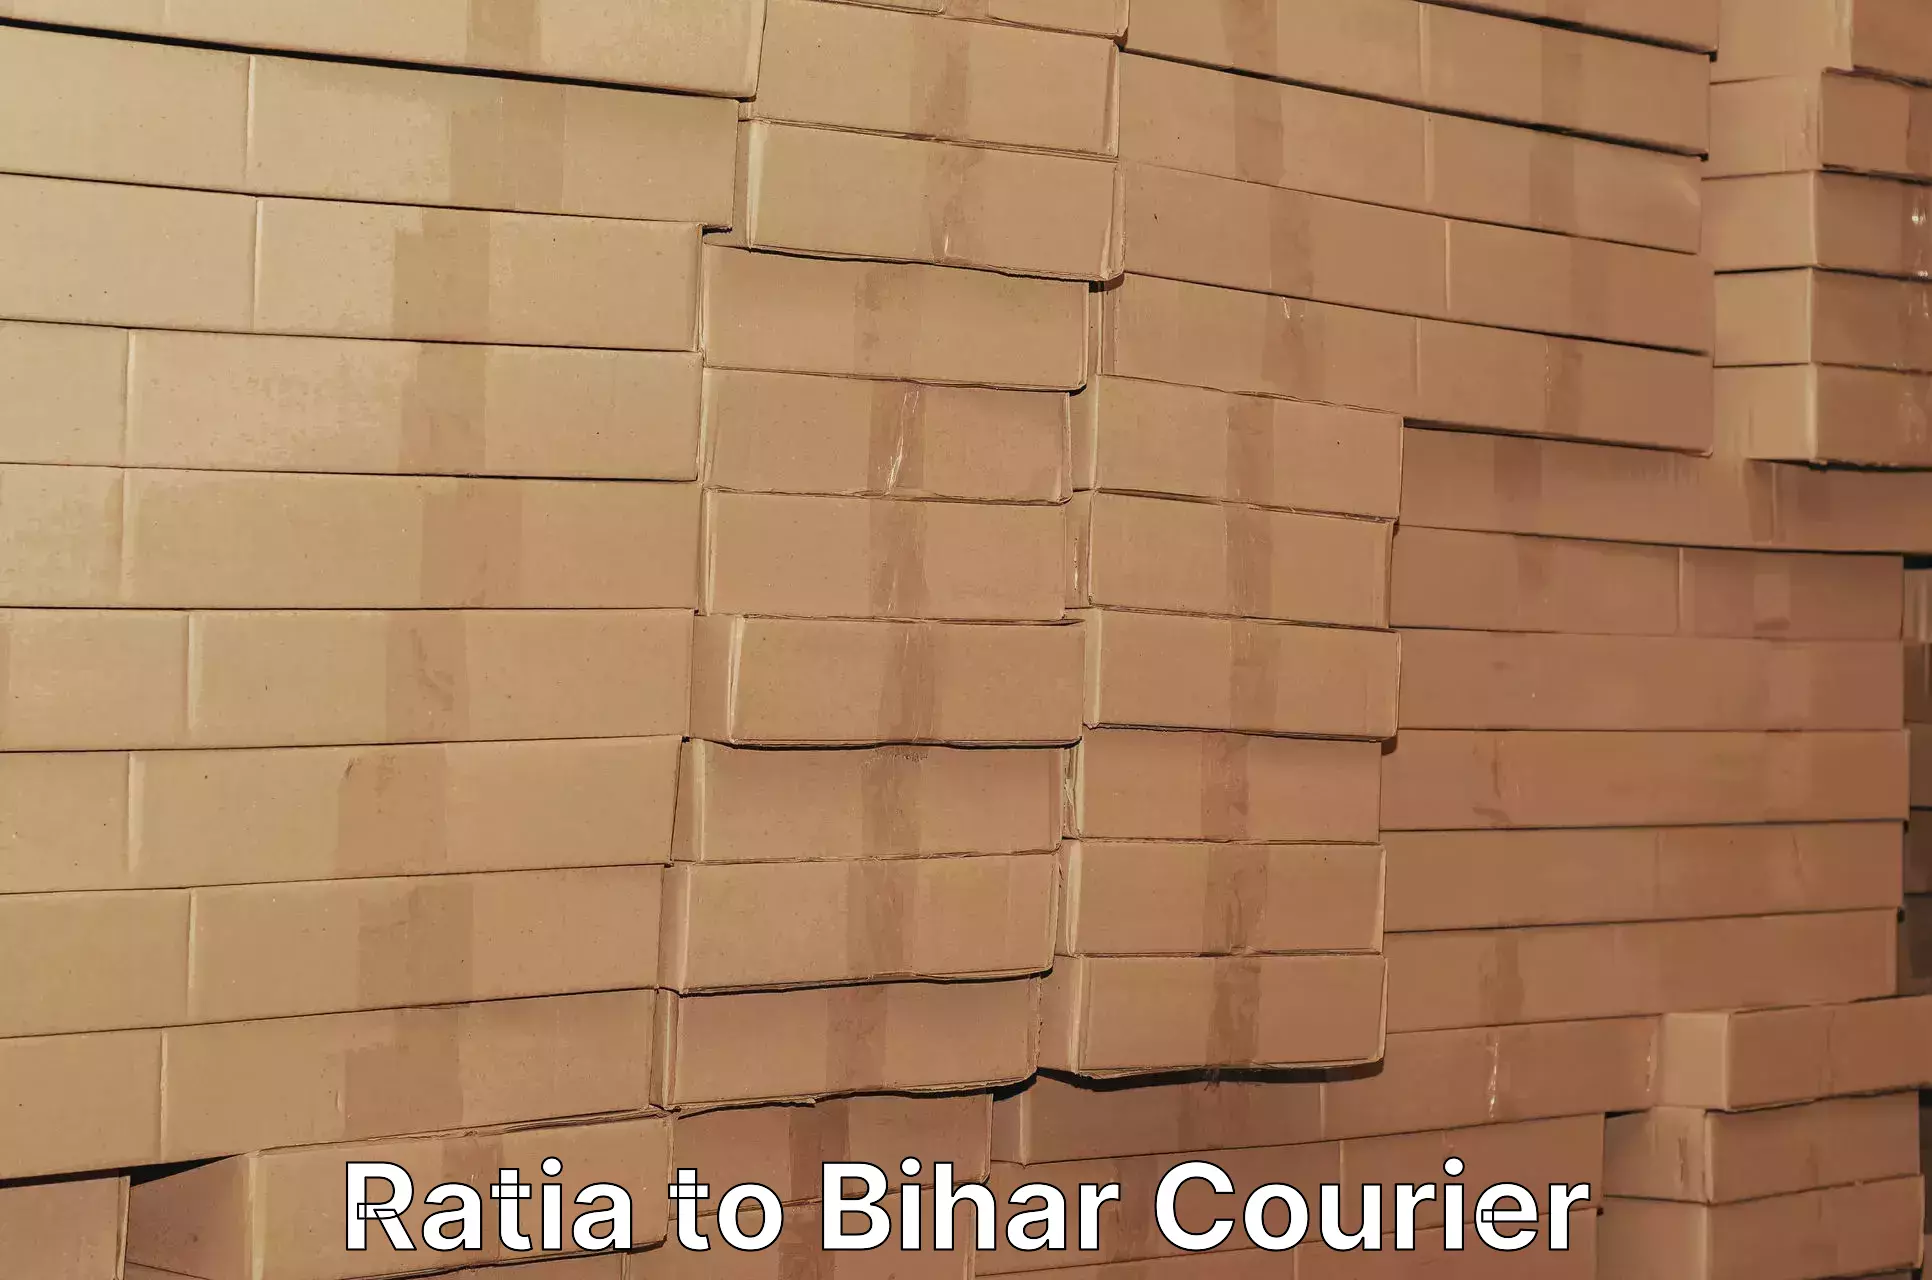 State-of-the-art courier technology Ratia to Sheohar